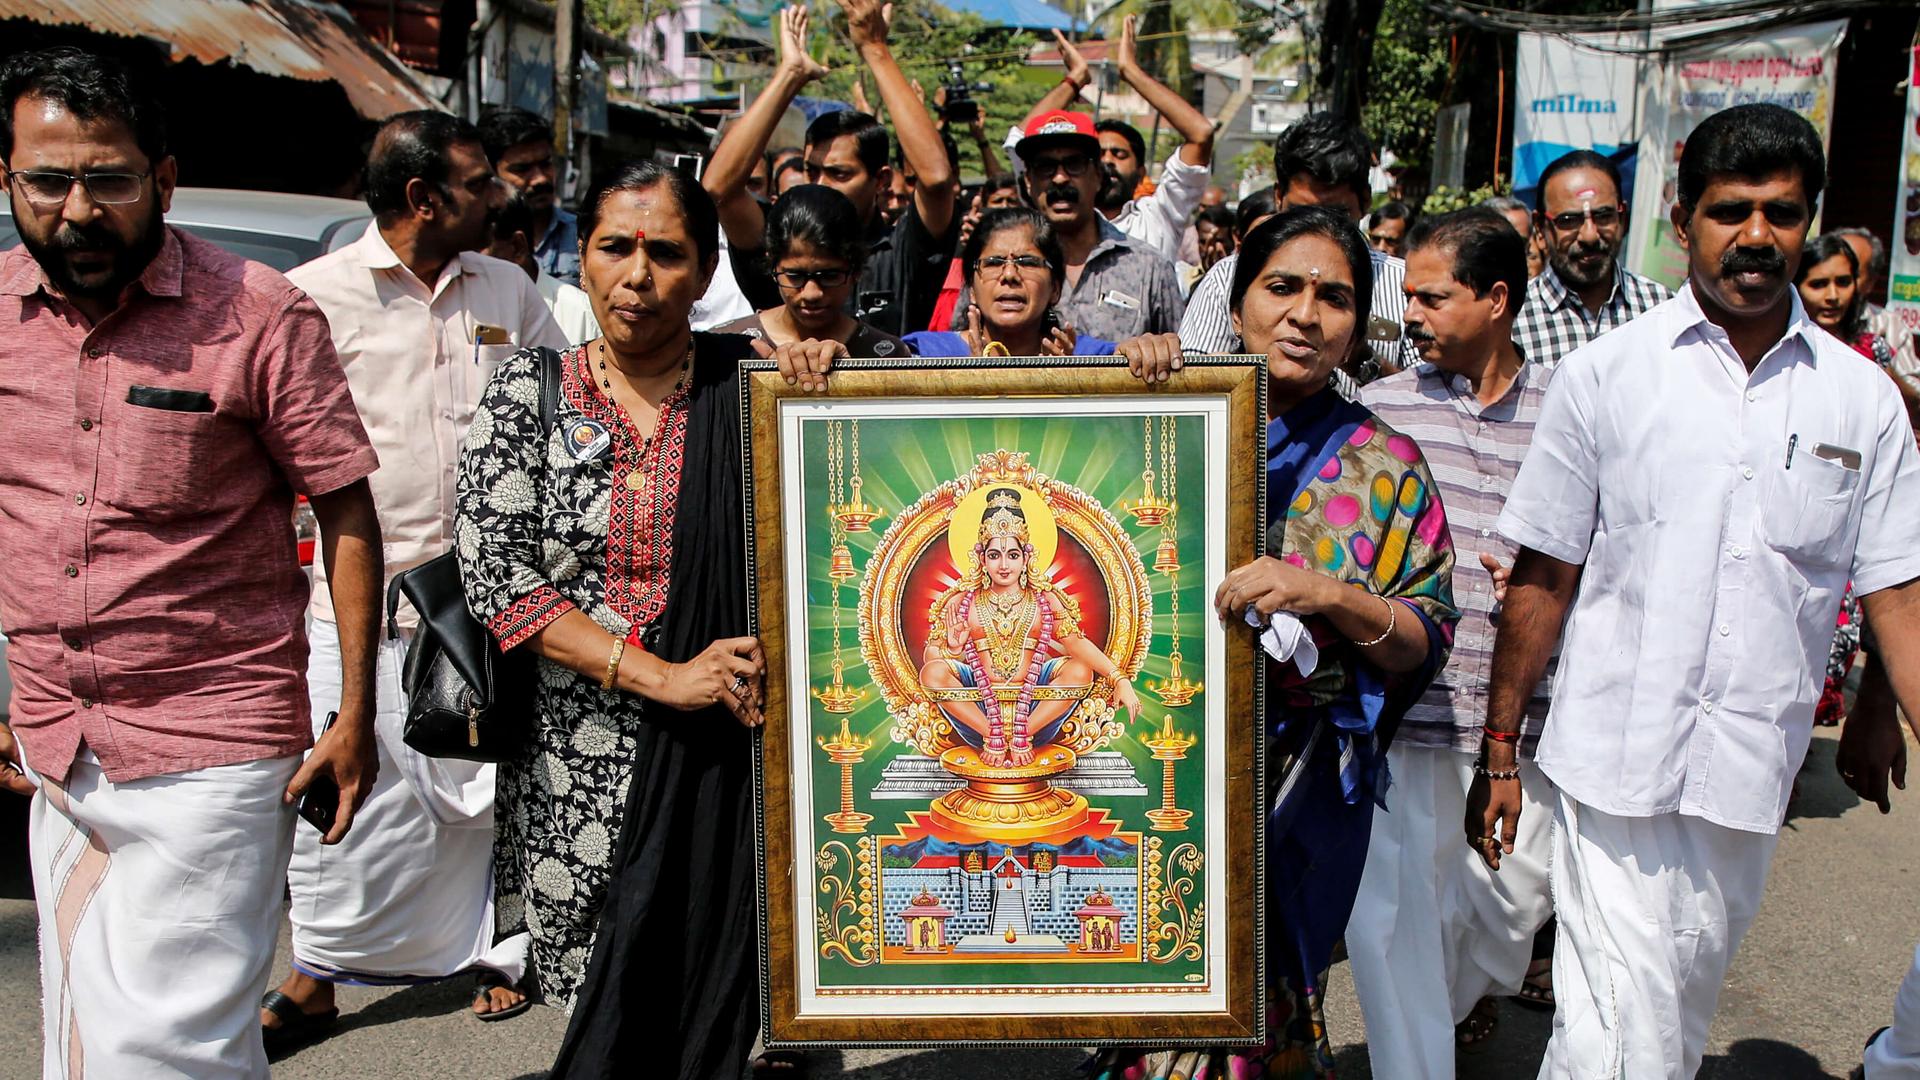 Protesters walk down the street carrying a sign of a Hindu deity. 